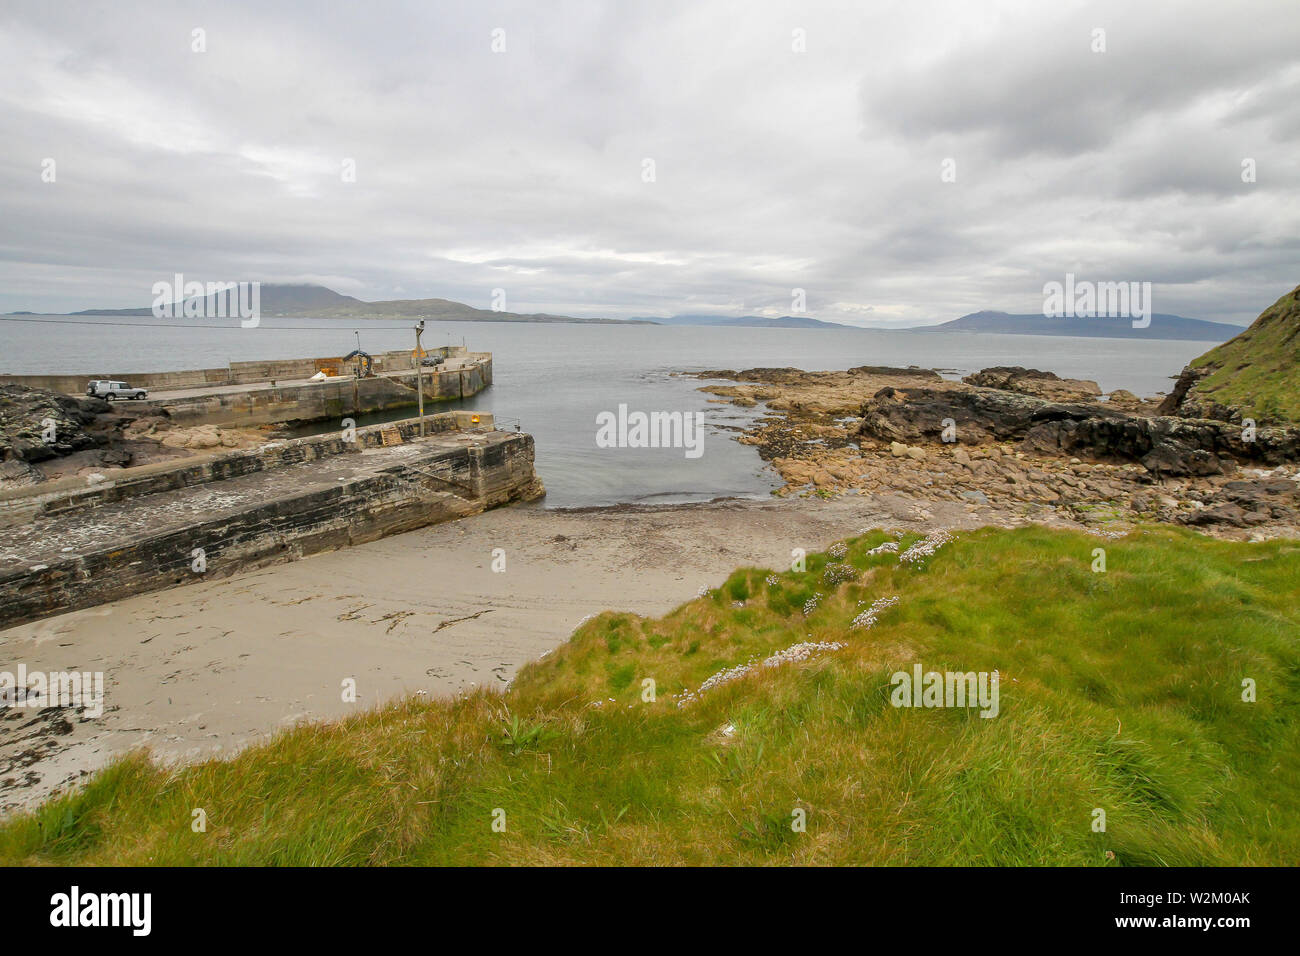 Harbour on Wild Atlantic Way Ireland, to the left is Clare Island in Clew Bay, County Mayo, Ireland as viewed from Roonagh Pier near Louisburgh. . Stock Photo